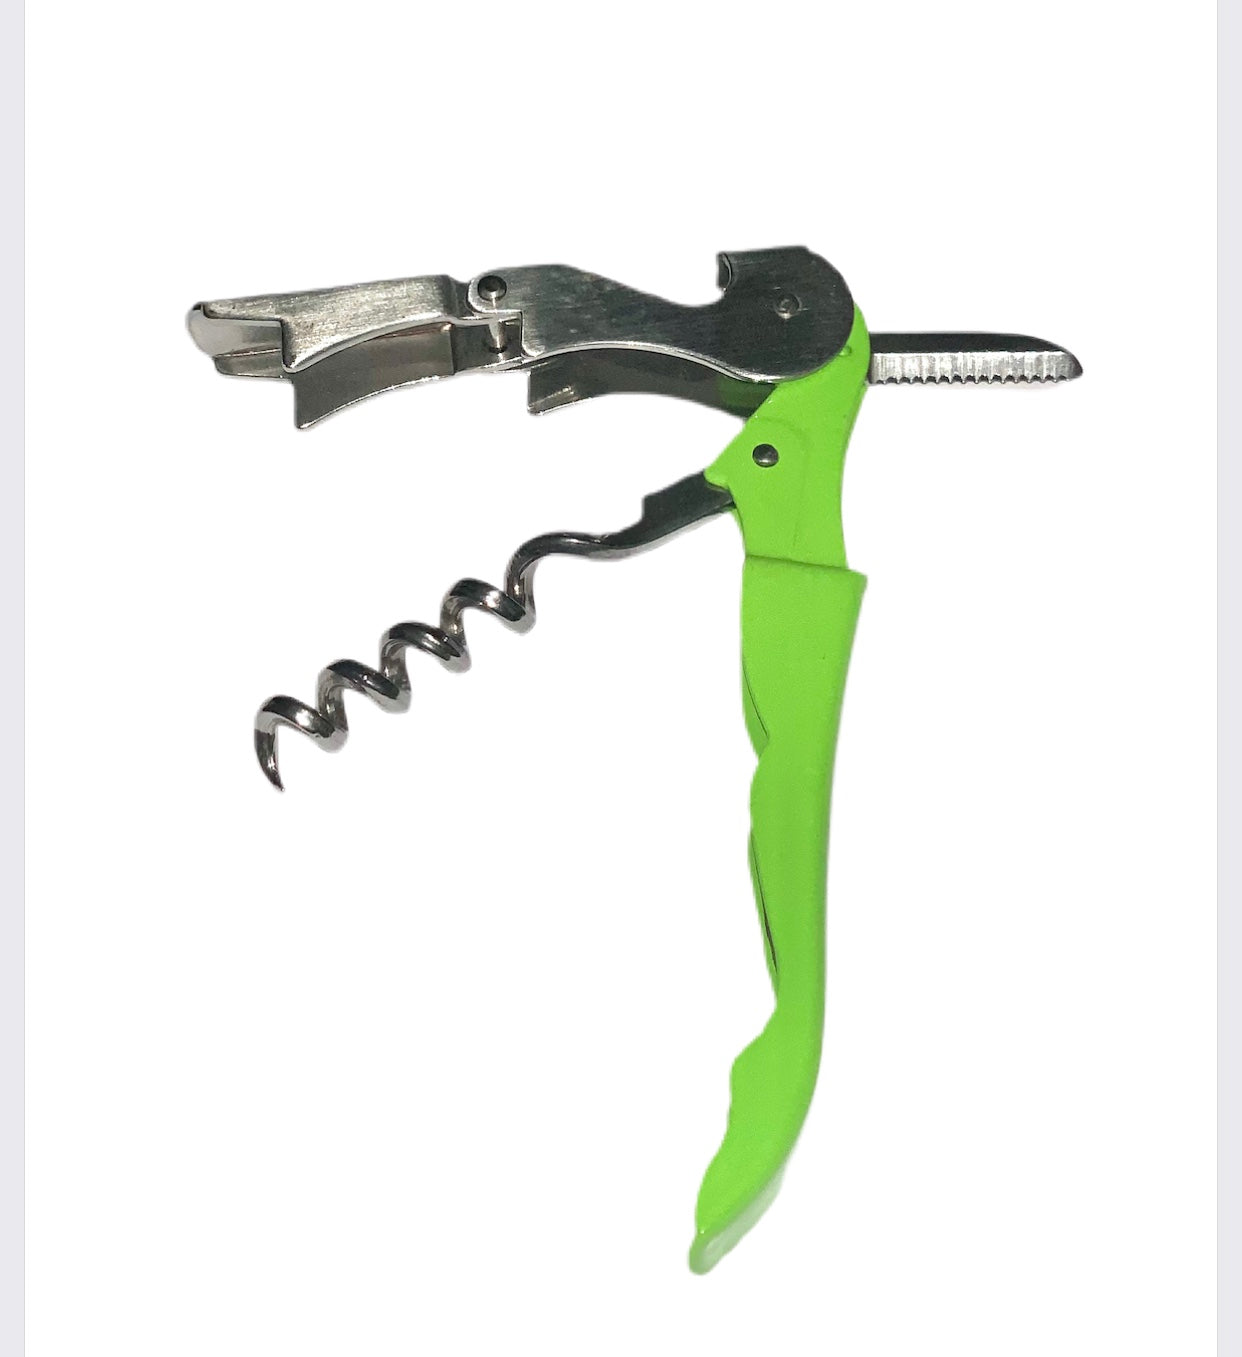 Waiter's Stainless Steel Corkscrew. Heavy Duty, Double-hinged Multi-tool and Portable. Easy to use! Gren. Notice multi-tool function.